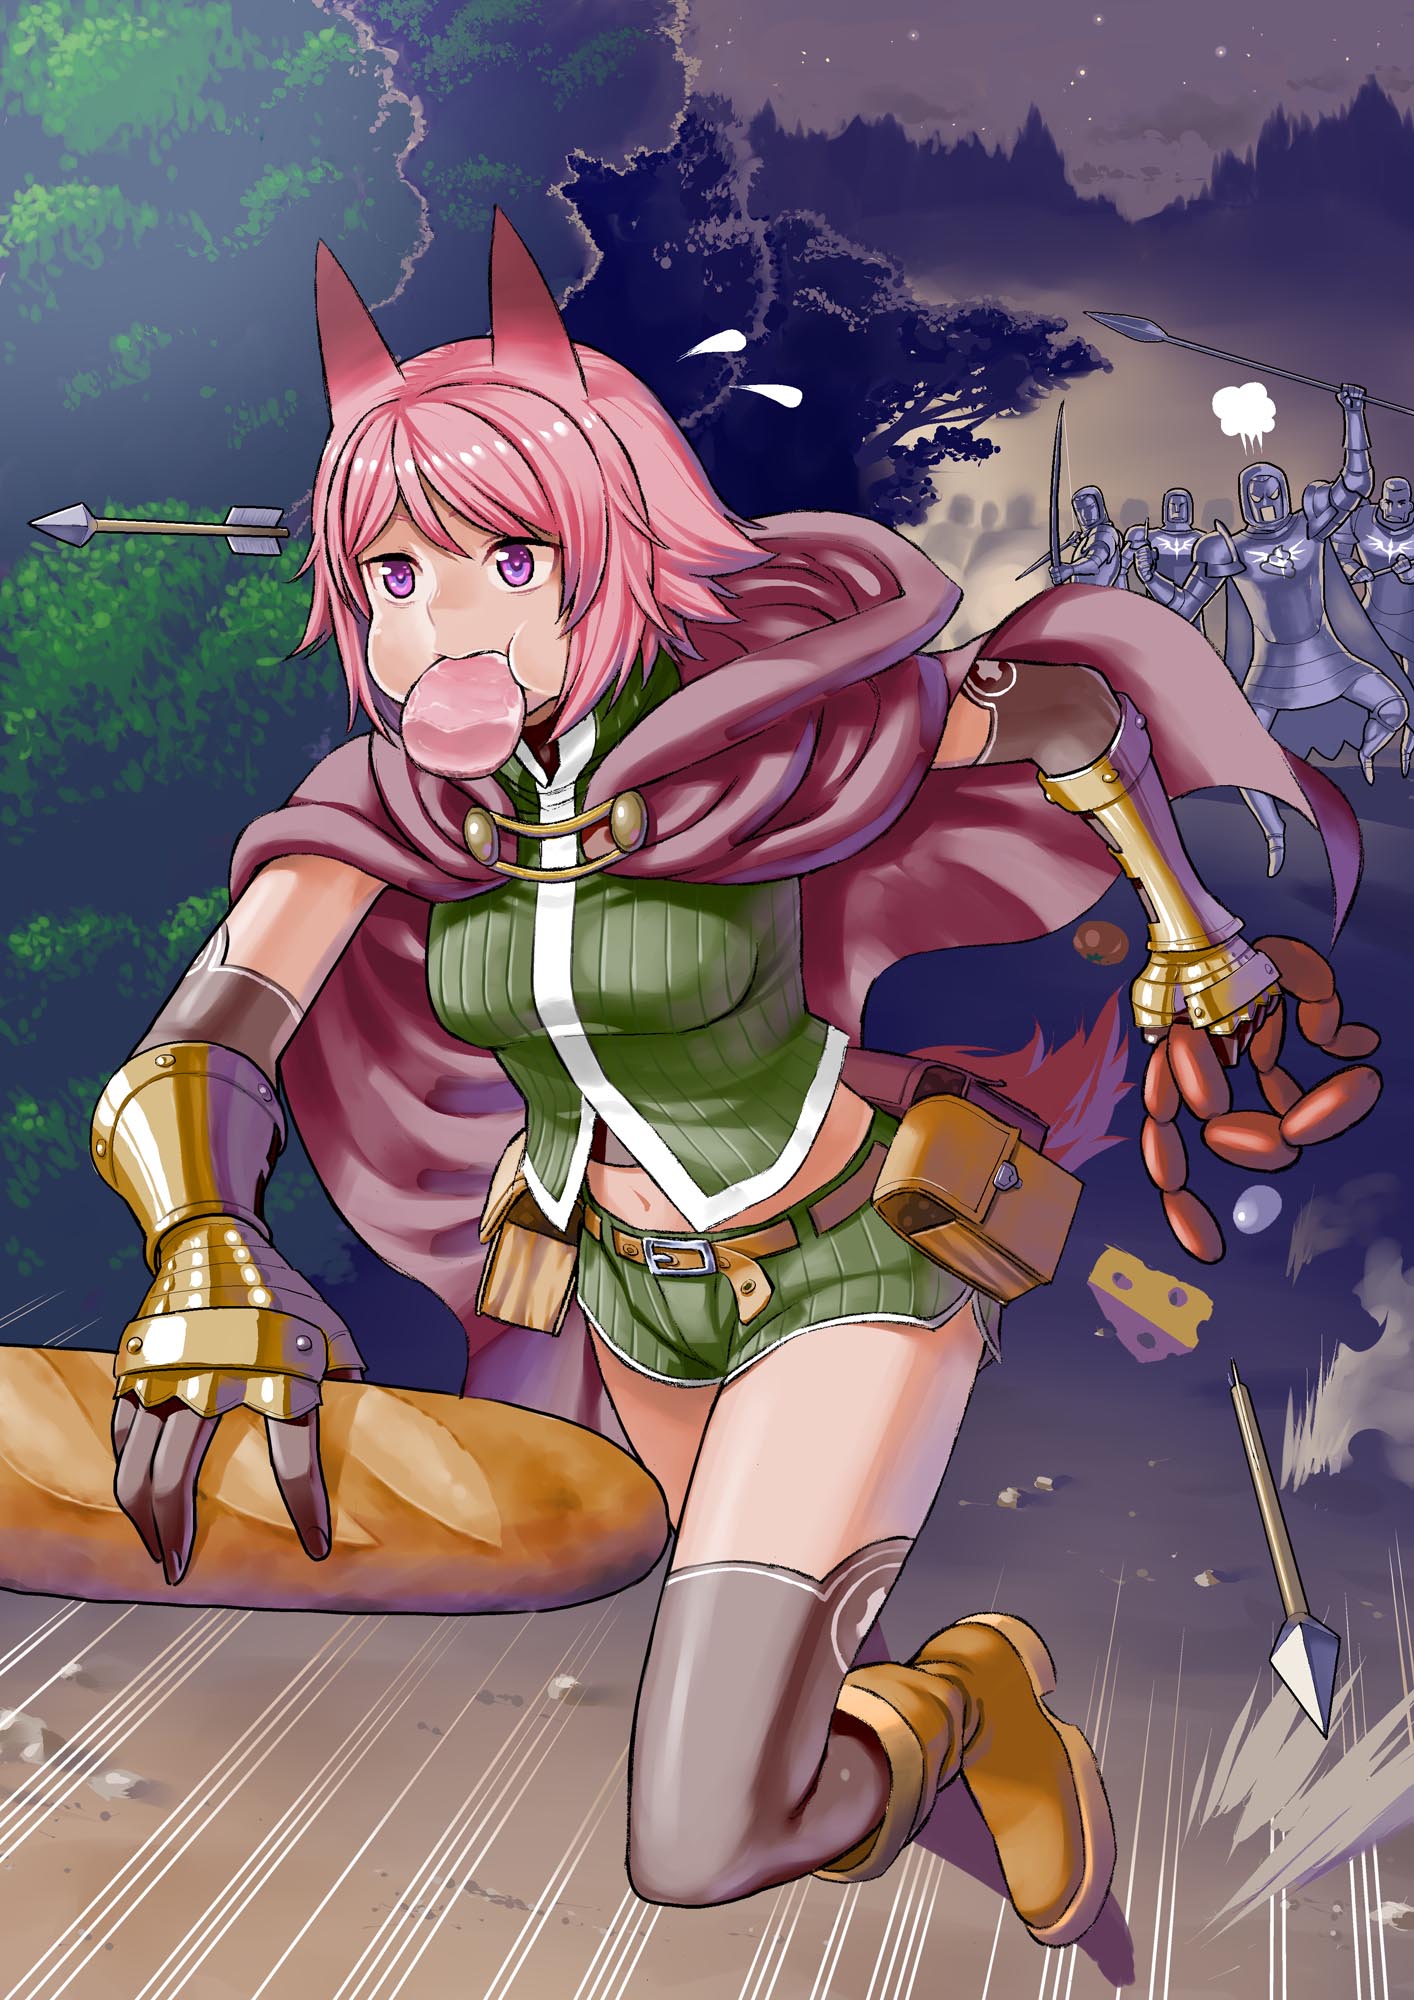 1girl 4boys angry animal_ears armor arrow belt black_legwear boots bow_(weapon) bread bread_loaf chasing cheese elbow_gloves food food_in_mouth gauntlets gloves highres midriff multiple_boys navel pink_hair polearm running sausage short_hair short_shorts shorts spear thigh-highs tree umaguti violet_eyes weapon